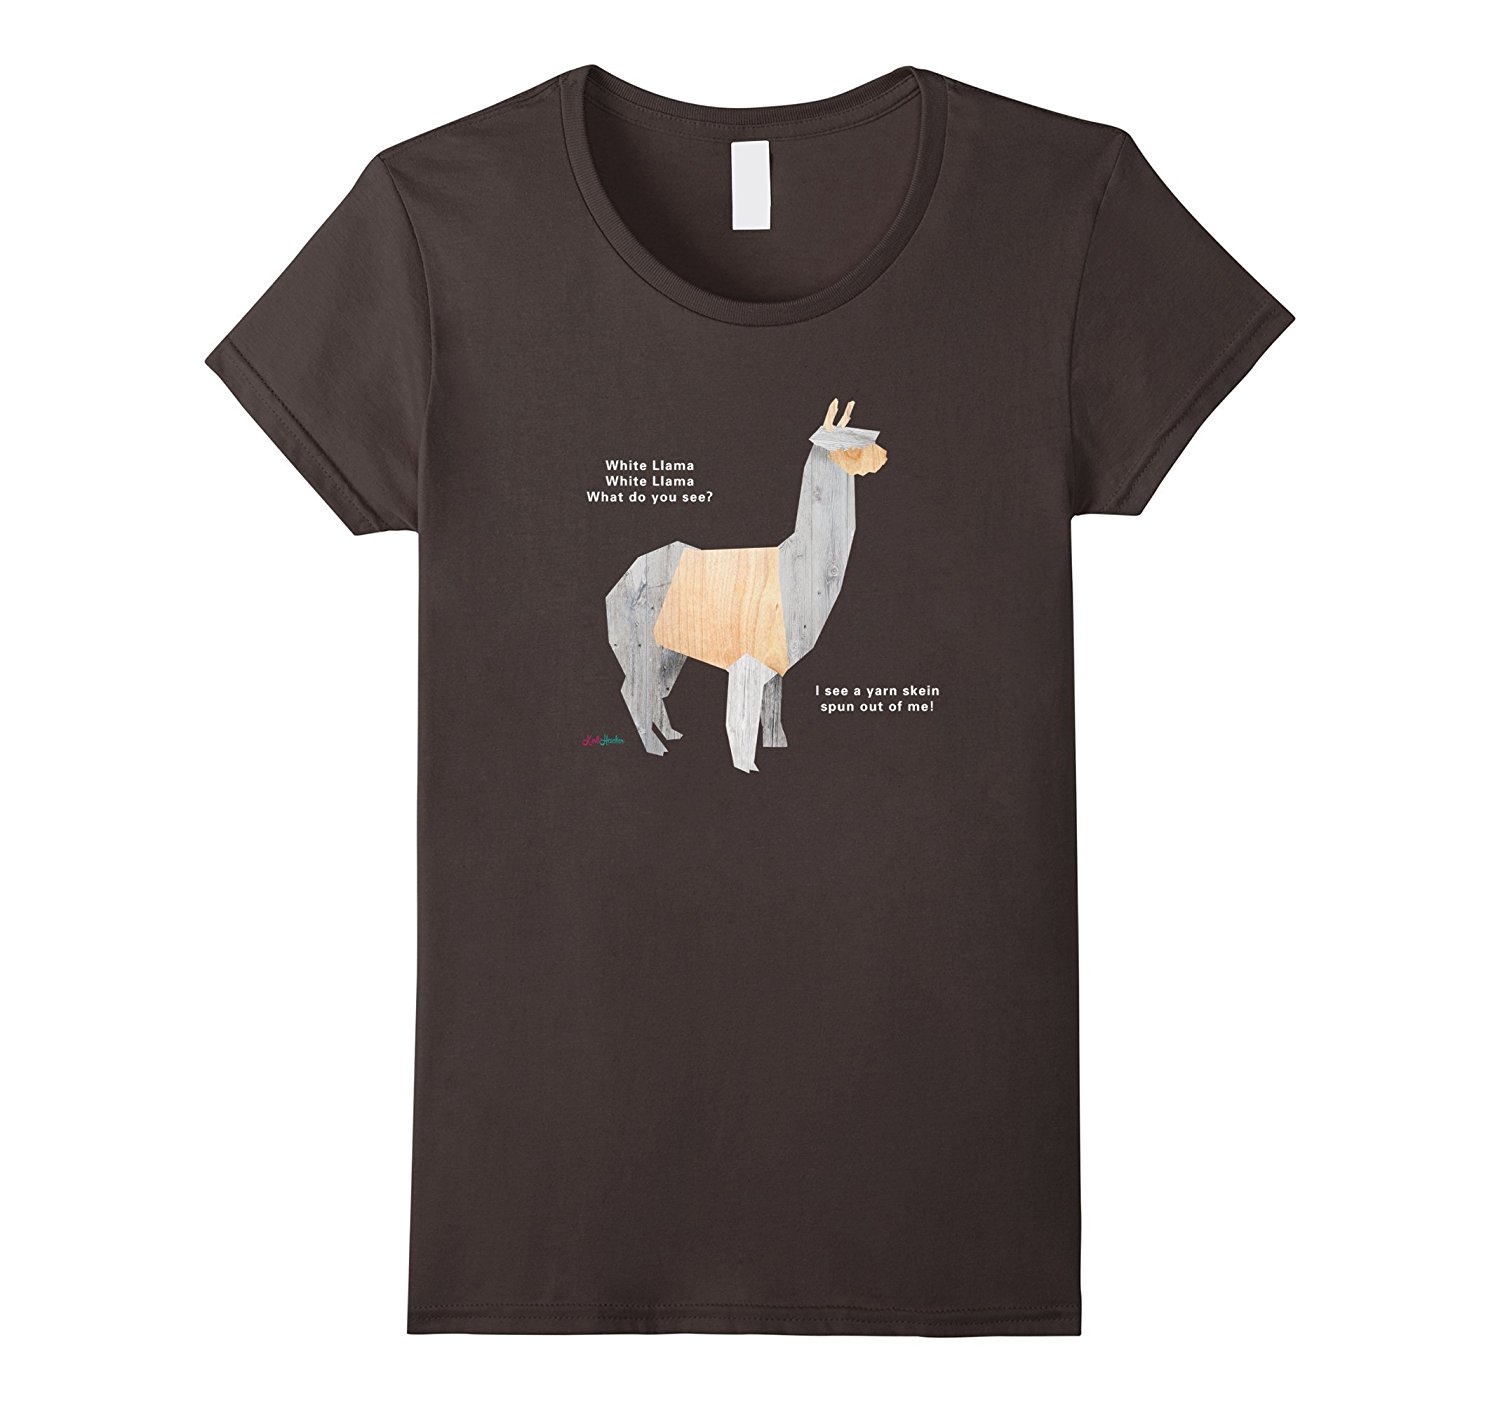 The Best T-Shirts For Knitters - Score Great Gifts For Crafty Folks Who Love To Knit!